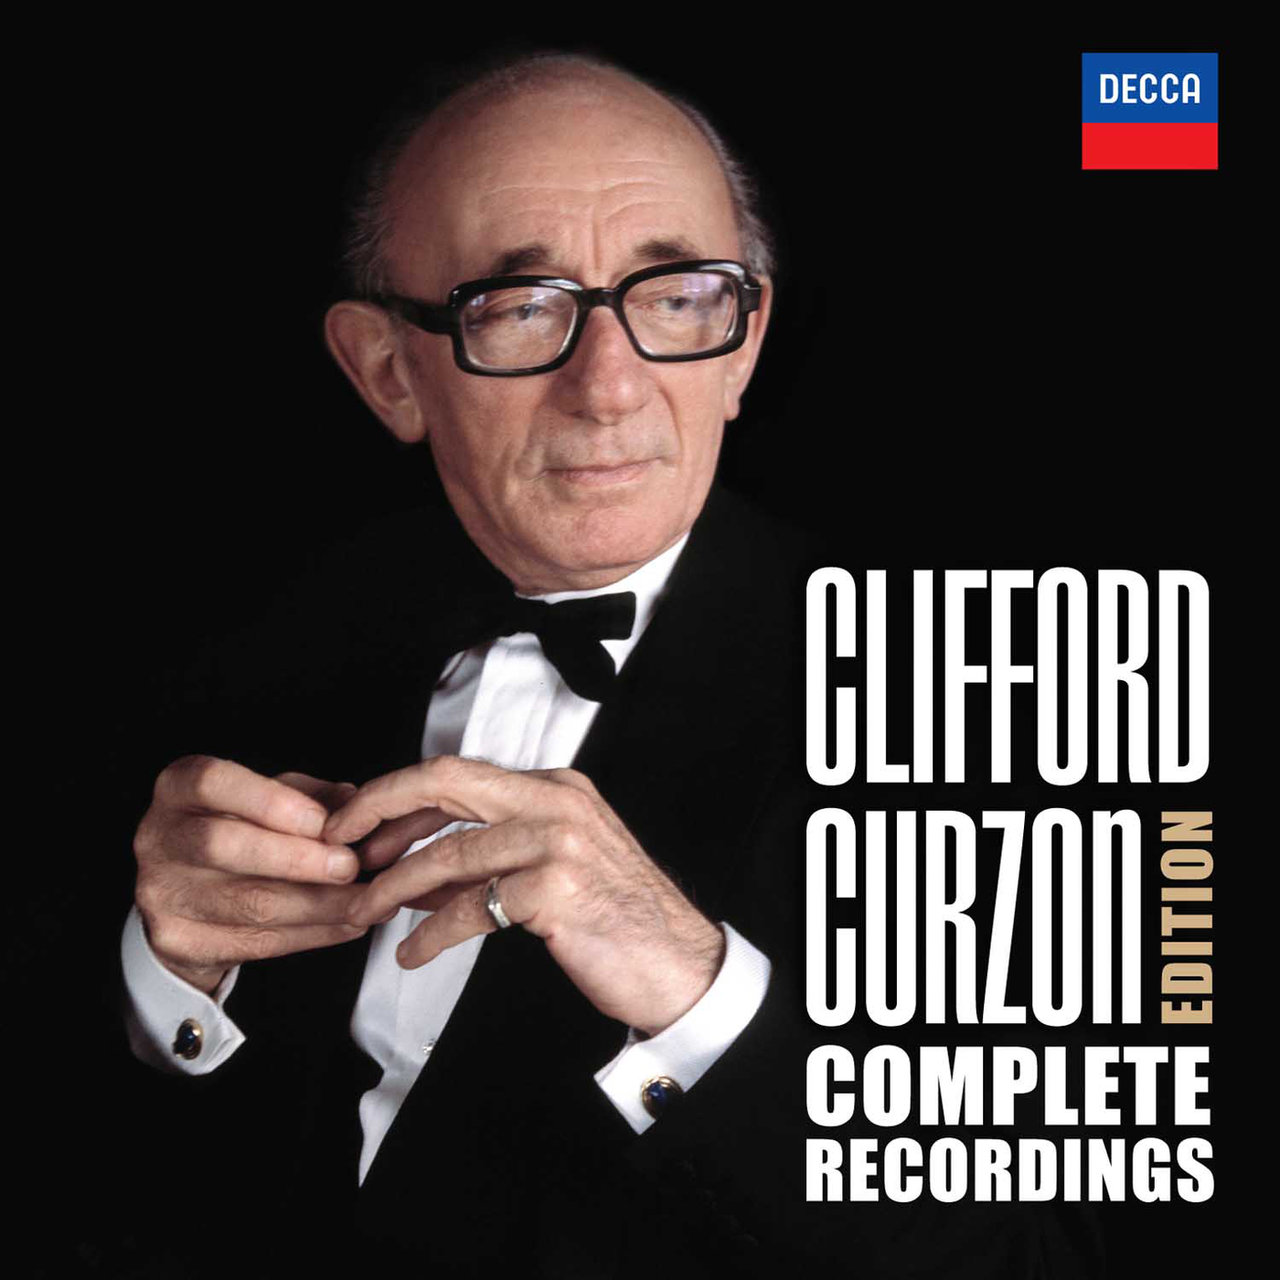 Clifford Curzon - Complete Recordings - 01-07cd NZB-only